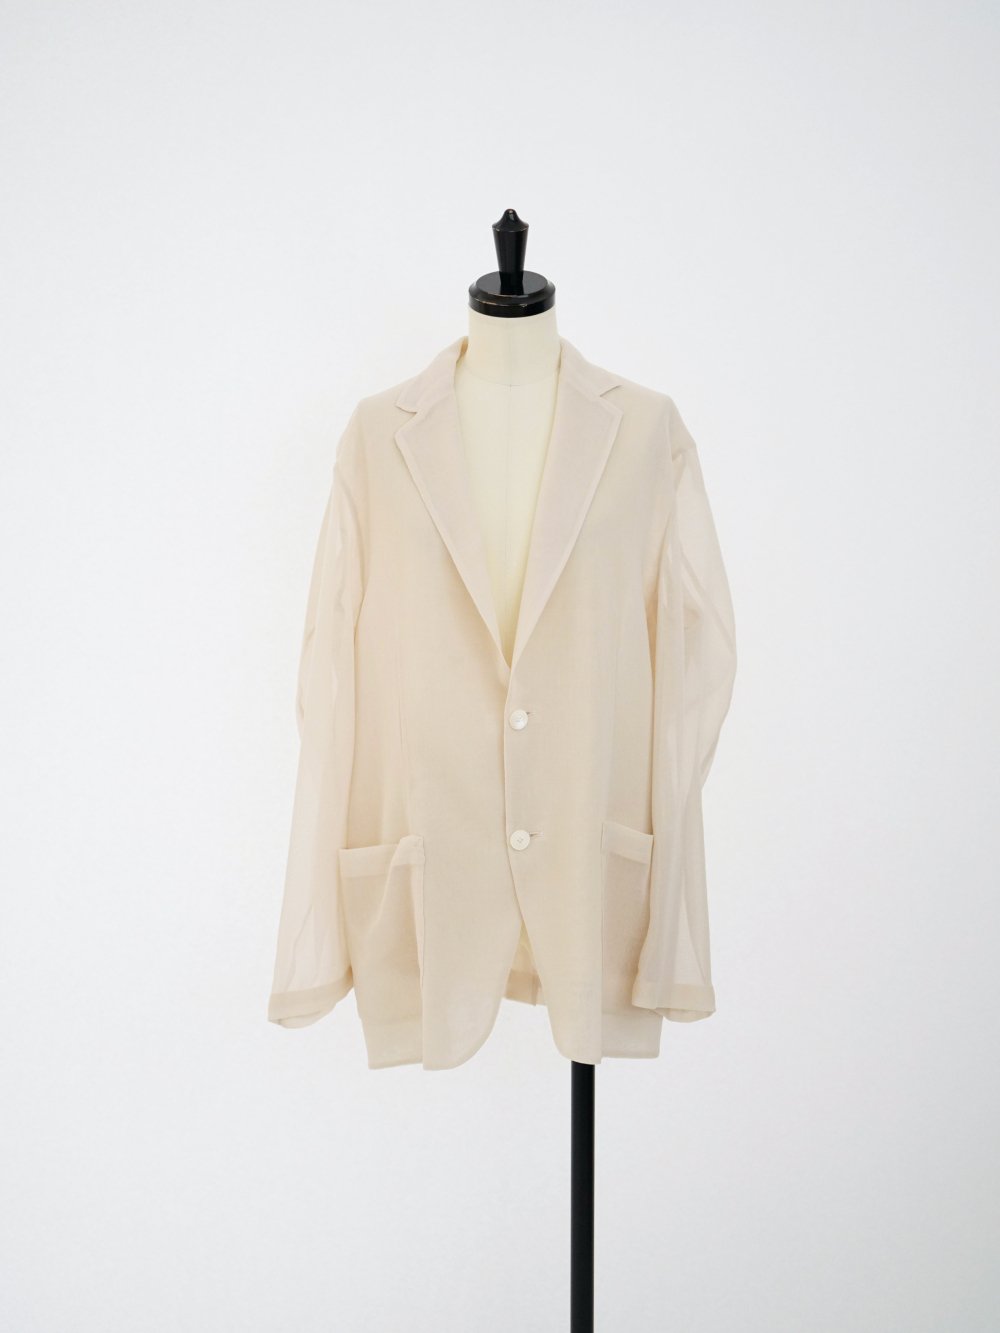 AURALEE WOOL RECYCLE POLYESTER LENO SHEER JACKET / IVORY